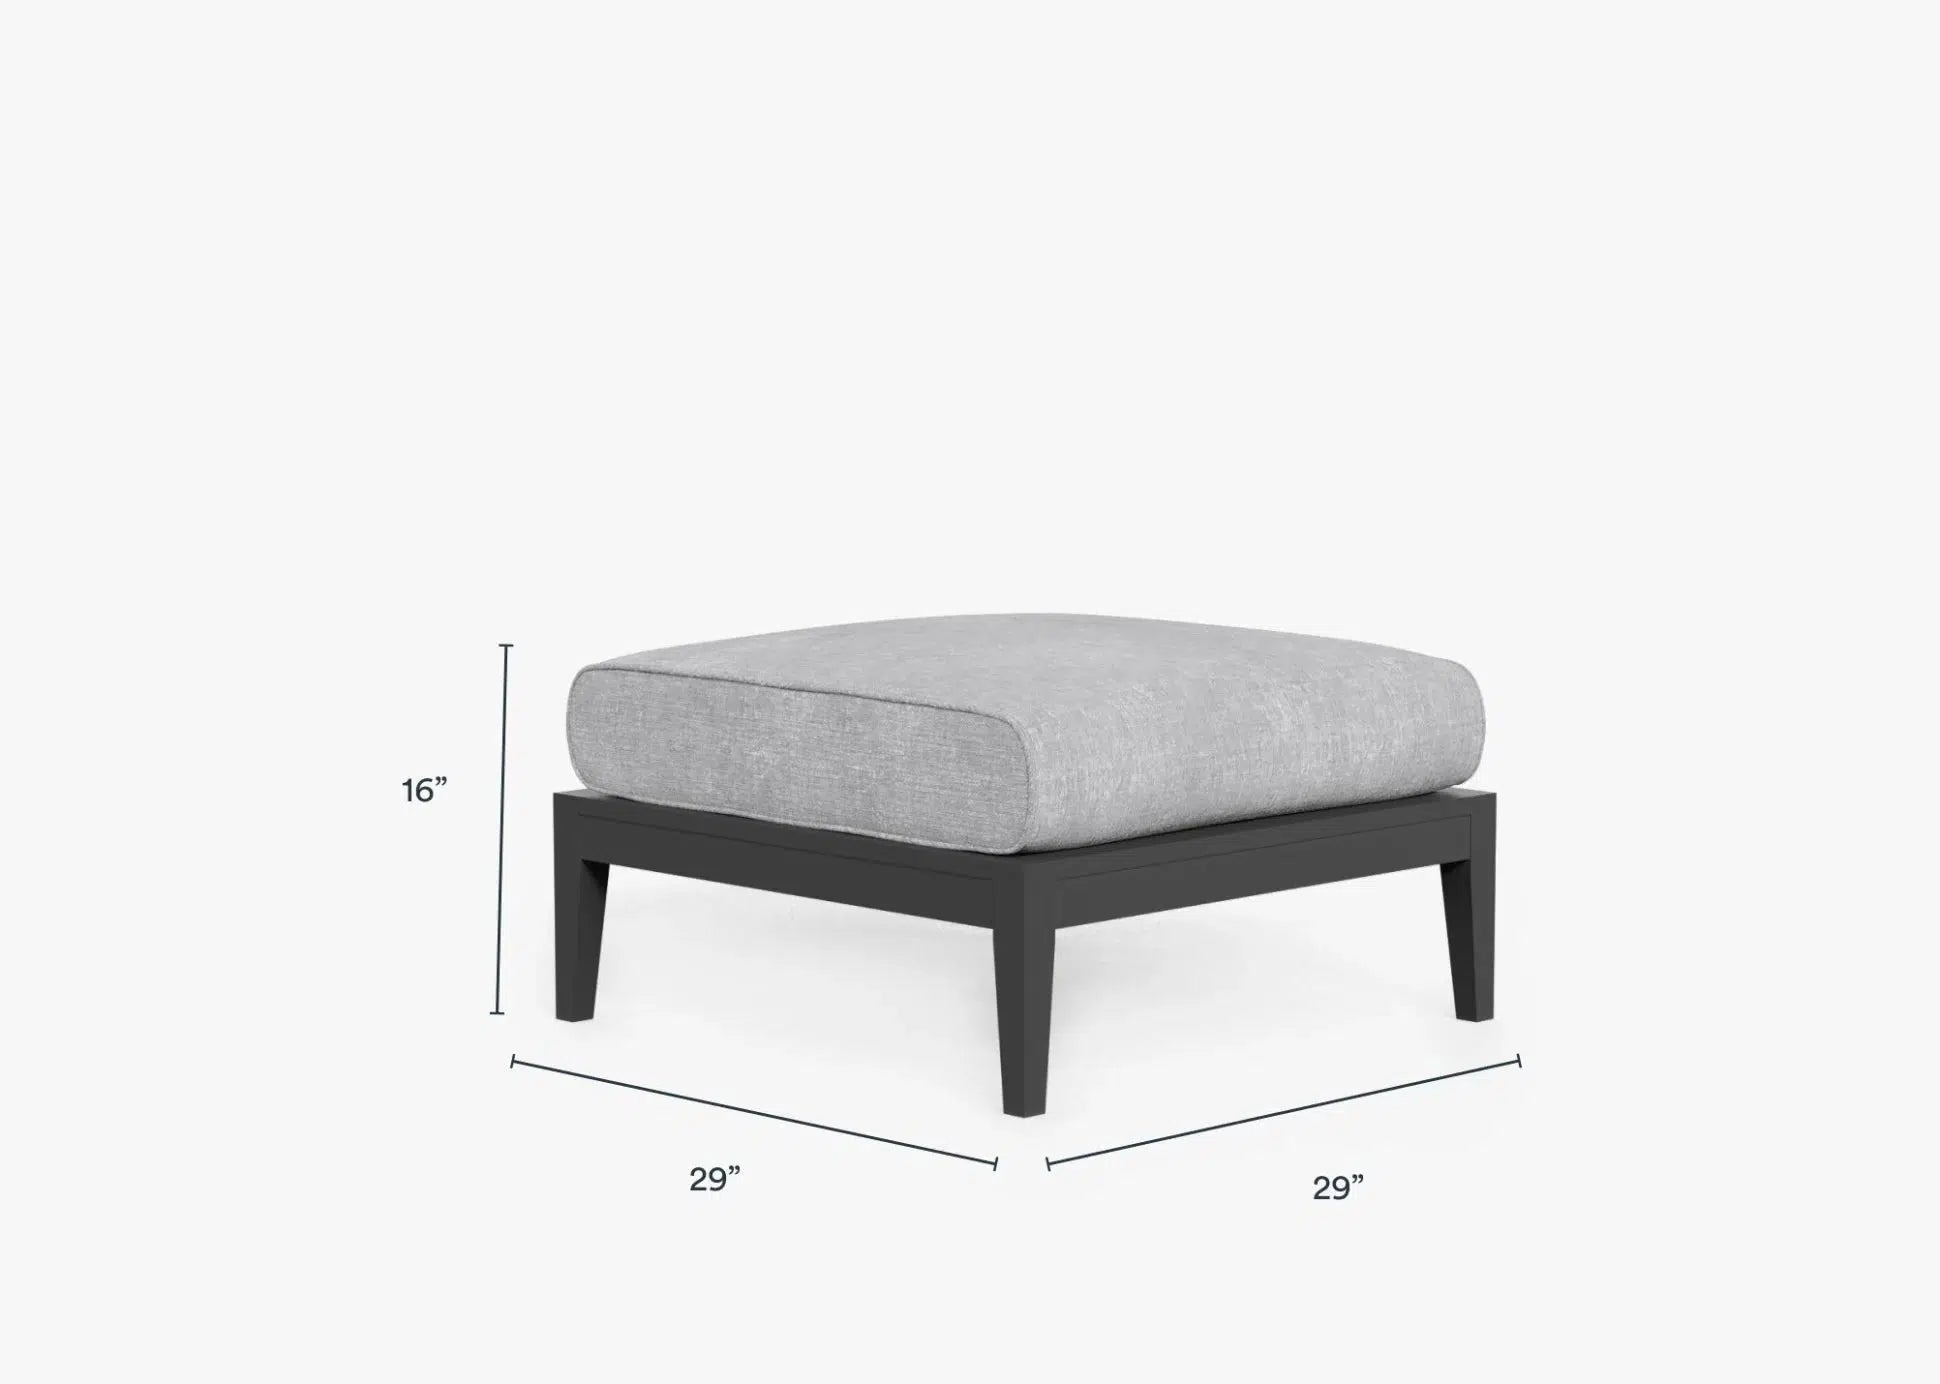 Live Outer 29" Charcoal Aluminum Outdoor Ottoman With Pacific Fog Gray Cushion